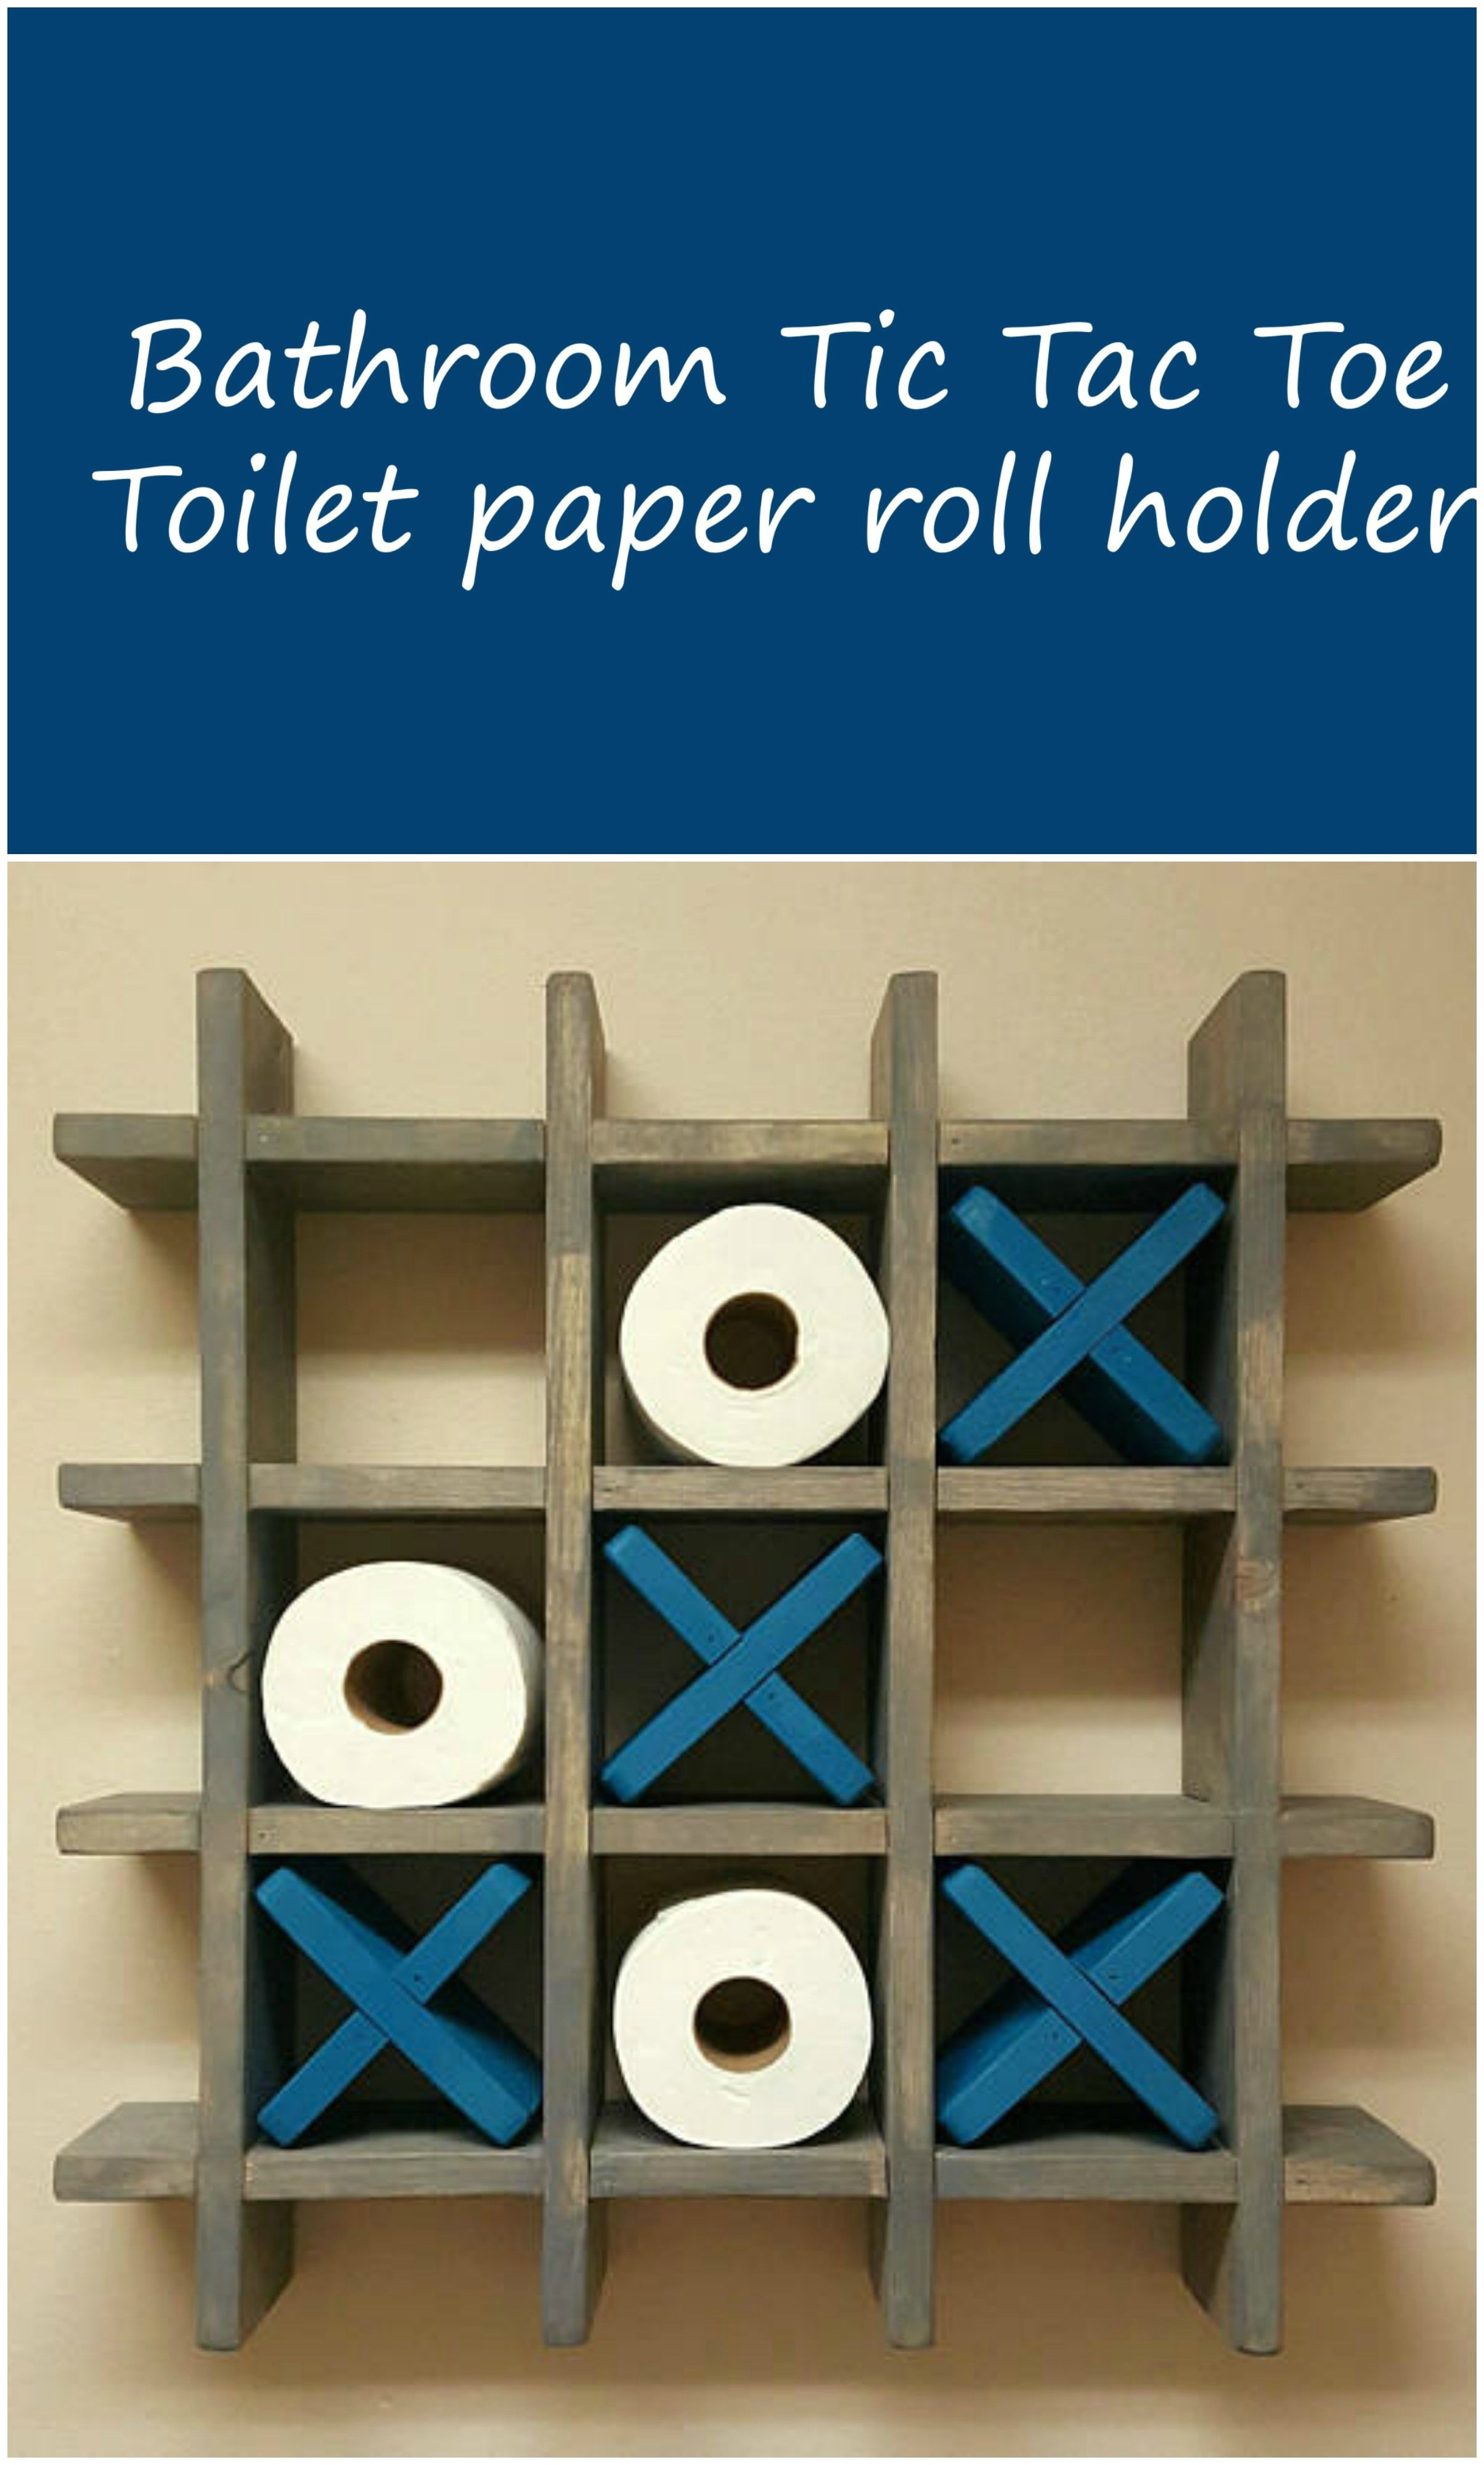 Tic Tac toe toilet Roll Holder Bathroom Tic Tac toe Game Made to order toilet Paper Roll